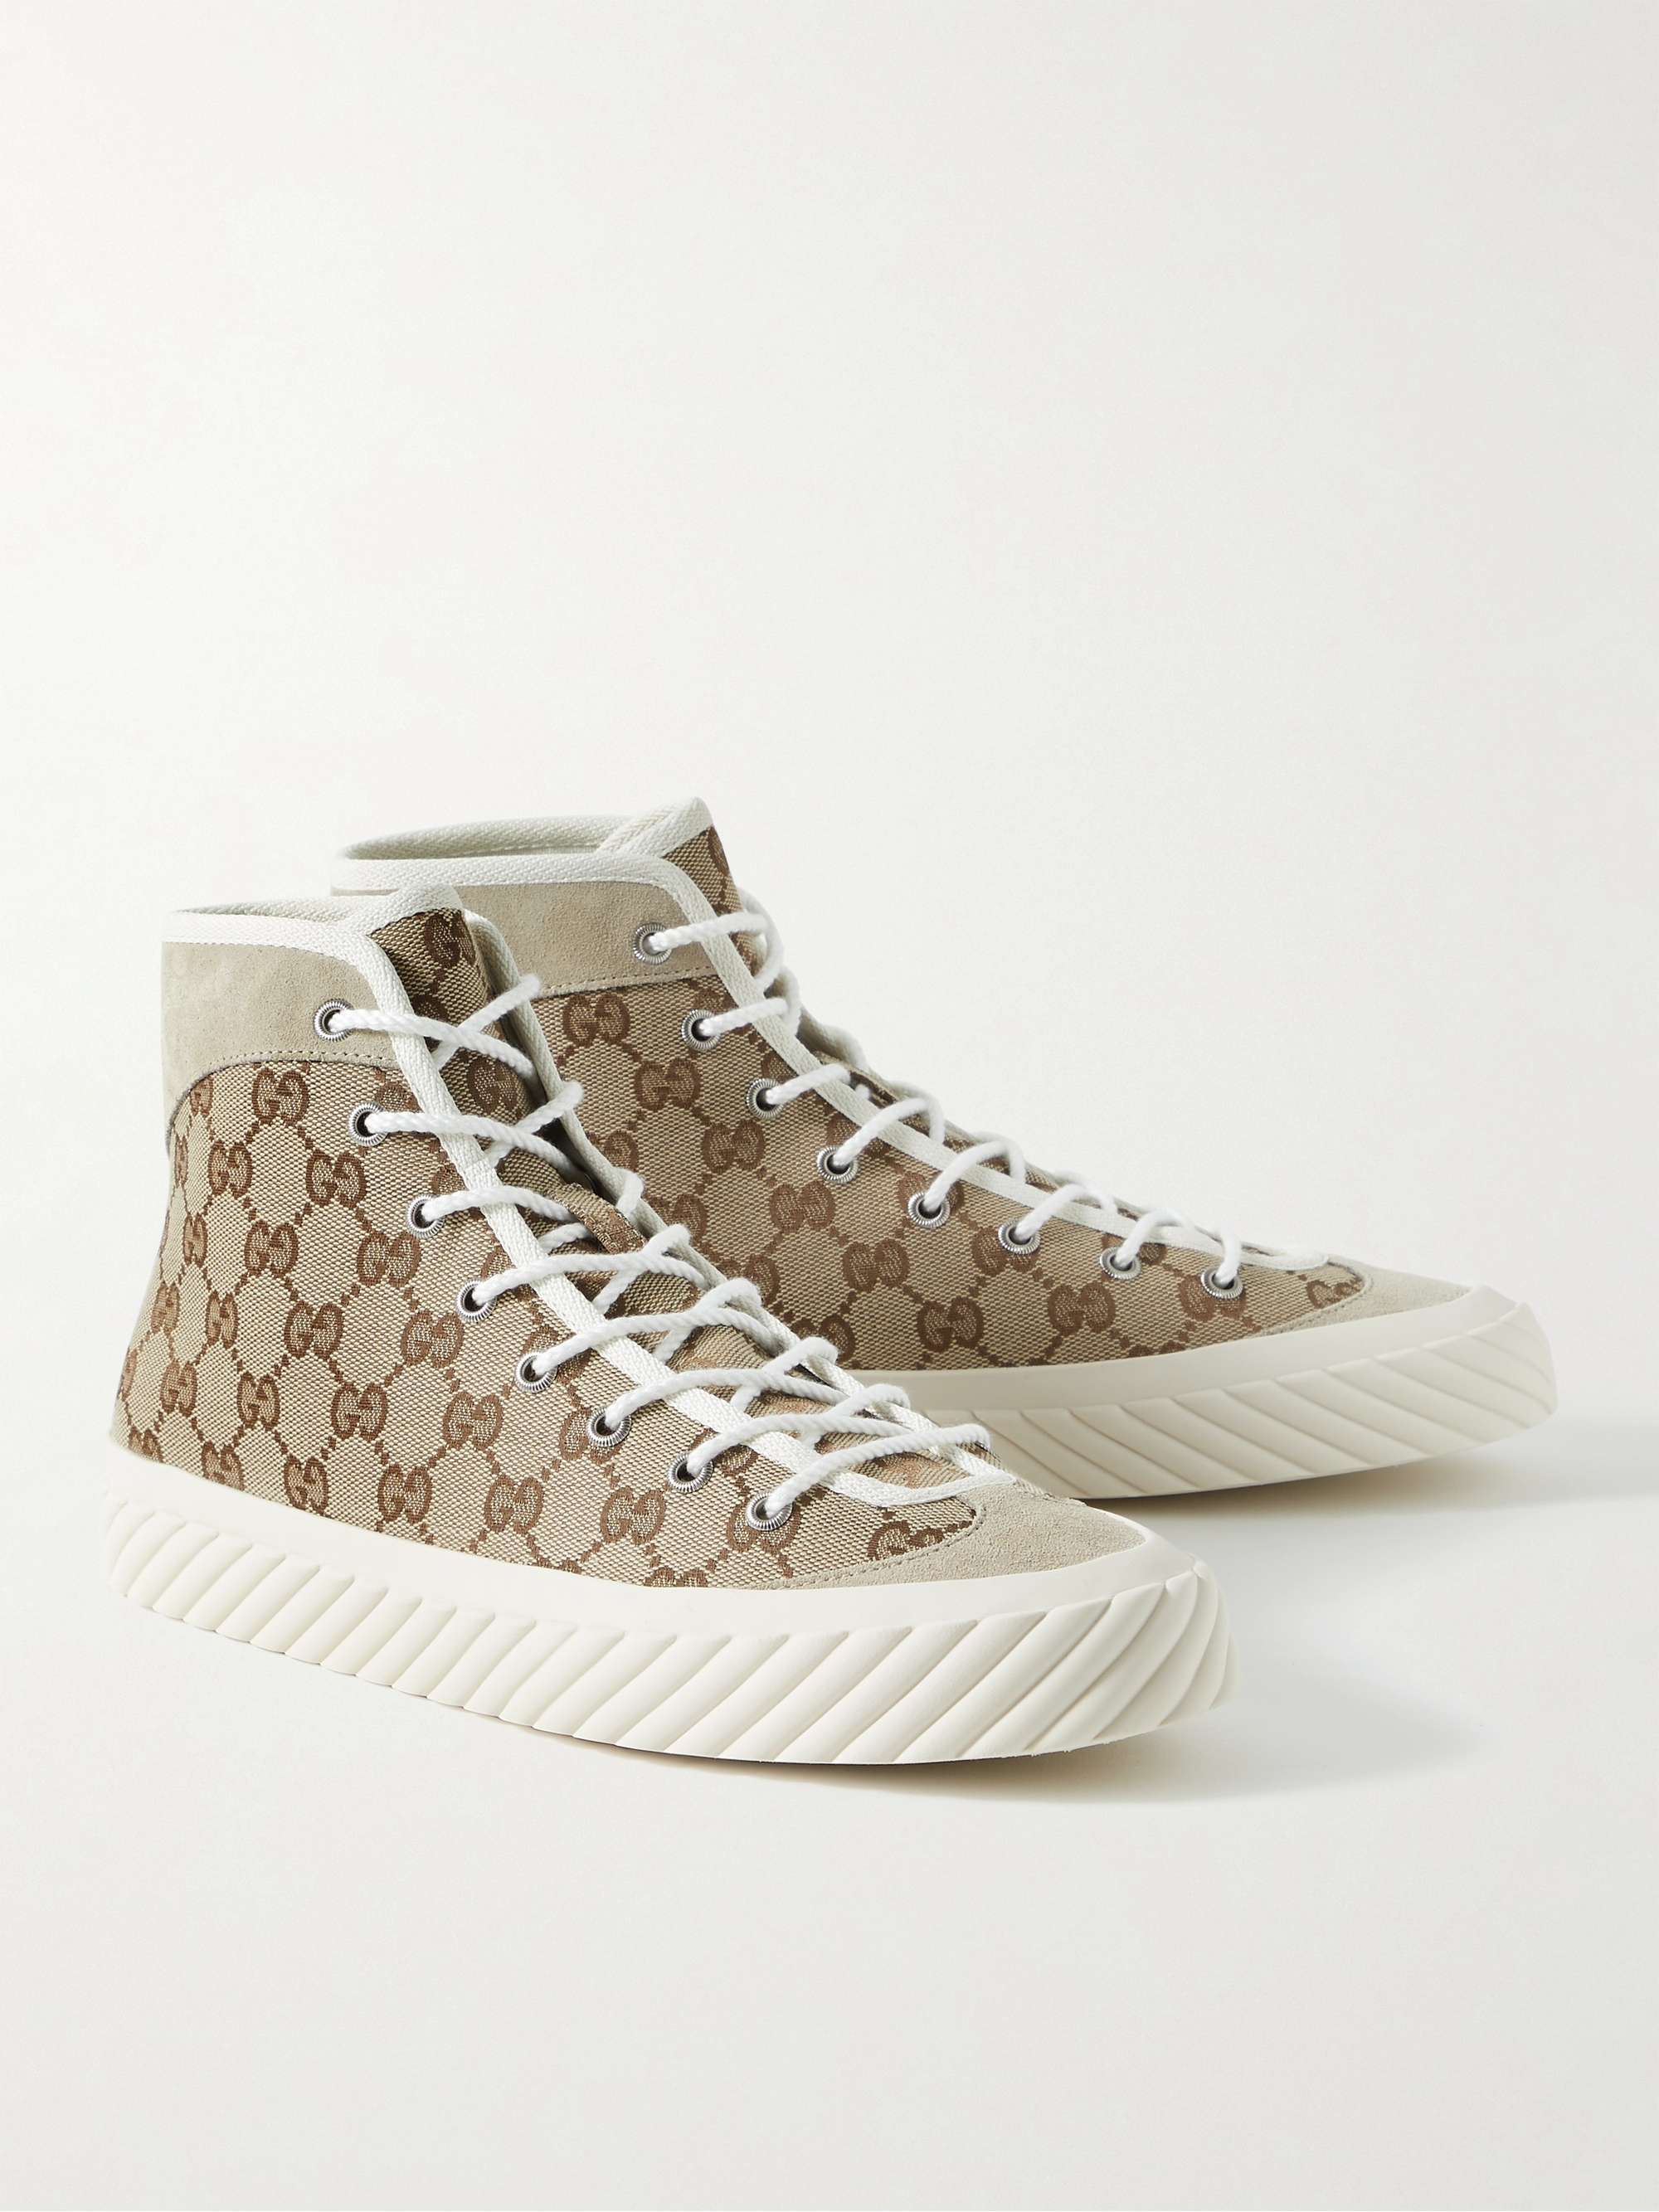 GUCCI Suede-Trimmed Monogrammed Canvas High-Top Sneakers for Men | MR PORTER